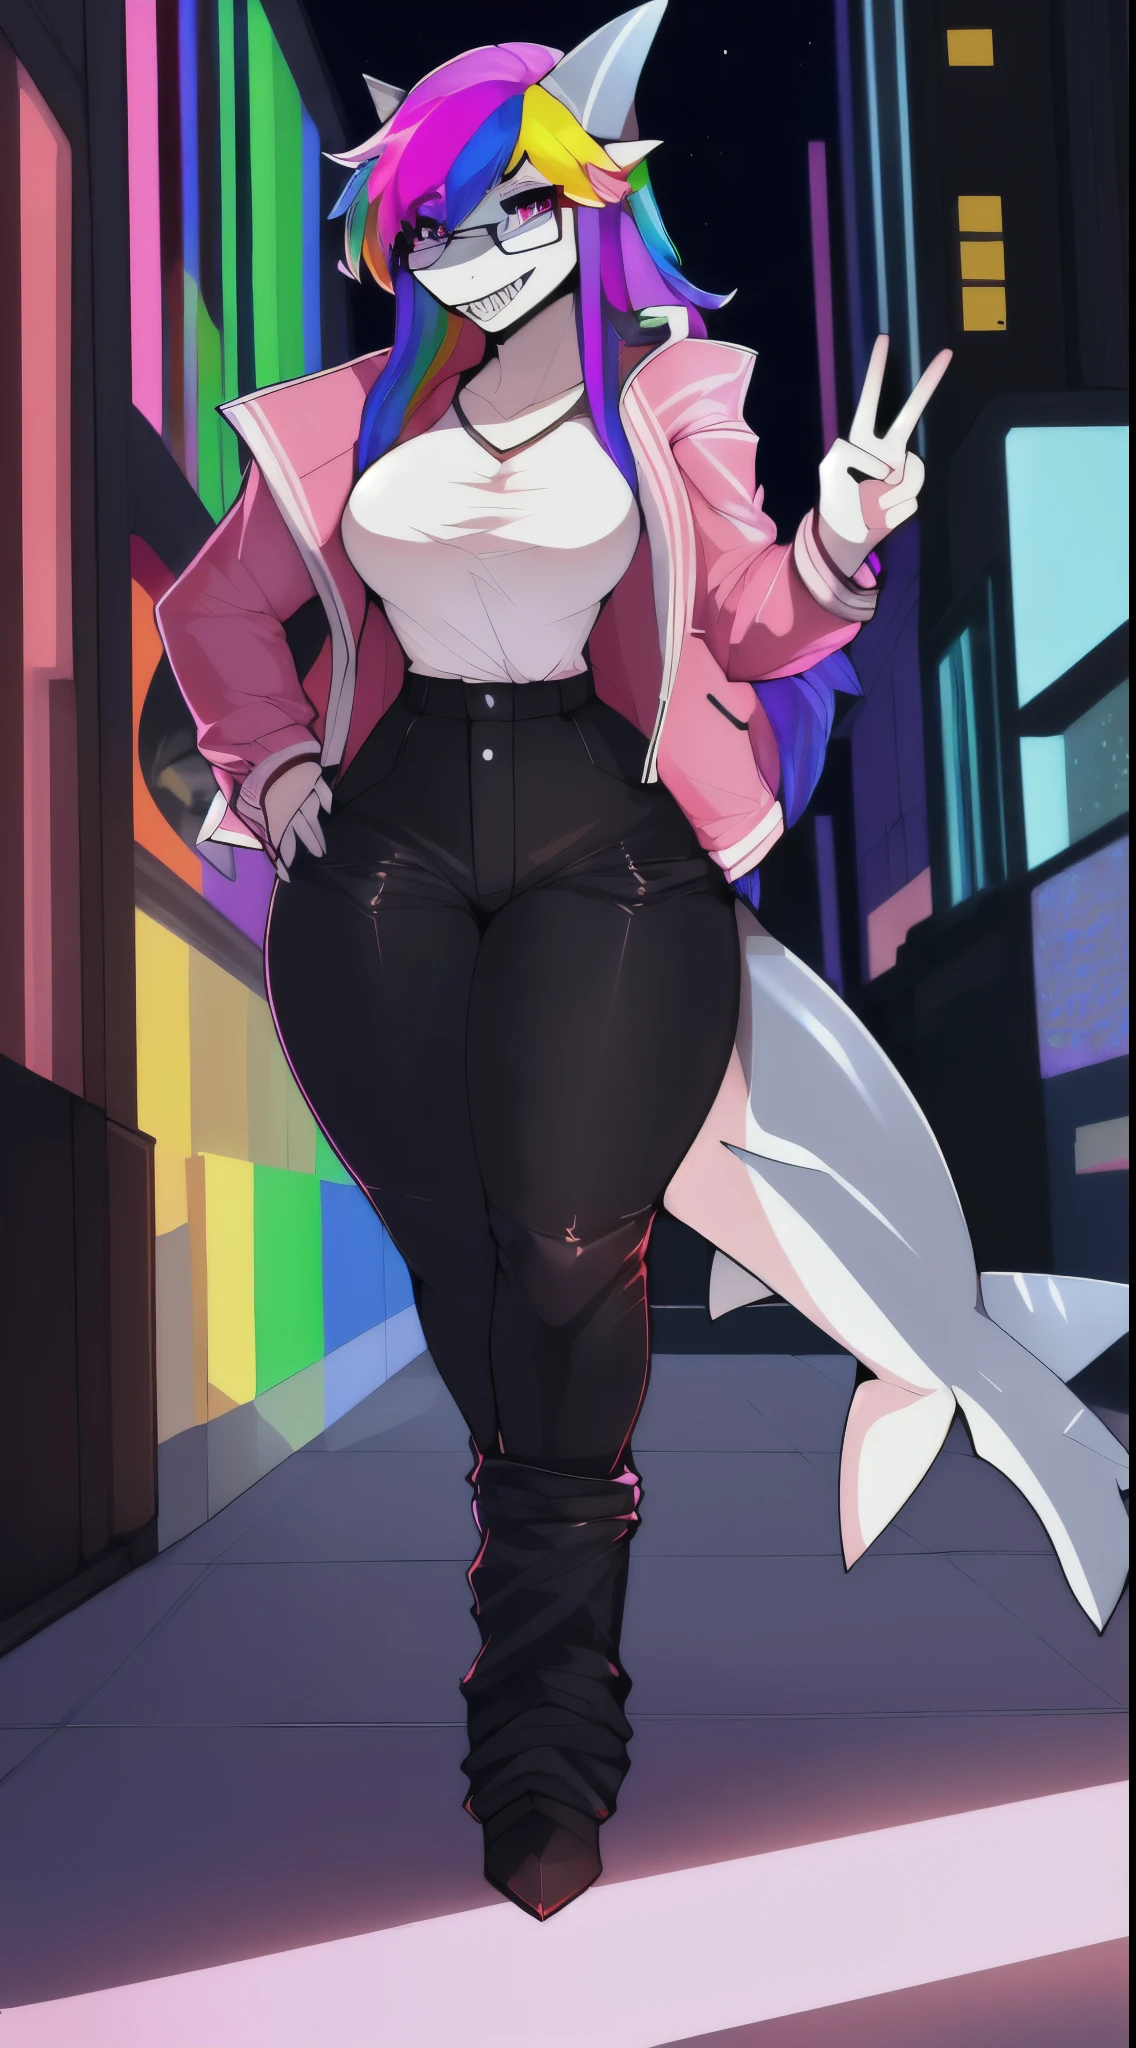 uploaded to e621, by claweddrip, (masterpiece), (best quality), (extremely detailed:1.3), (detailed shading), (ray tracing), (solo portrait), (solo female), shark, anthro shark, anthropomorphic shark, female shark, female anatomy, (big breasts:0.6), (wide hips:1.2), (thick thighs:0.8), (toned claves), (happy expression, smile, pointy teeth), (shark body, soft pink skin:1.5), magenta eyes, long hair, colorful hair, (rainbow hair:1.4), city background, (white lighting), vibrant, looking at viewer, clothed, glasses, (magenta jacket, white tshirt, black pants:1.5), (tucked in shirt), (high waist pants:1.5)